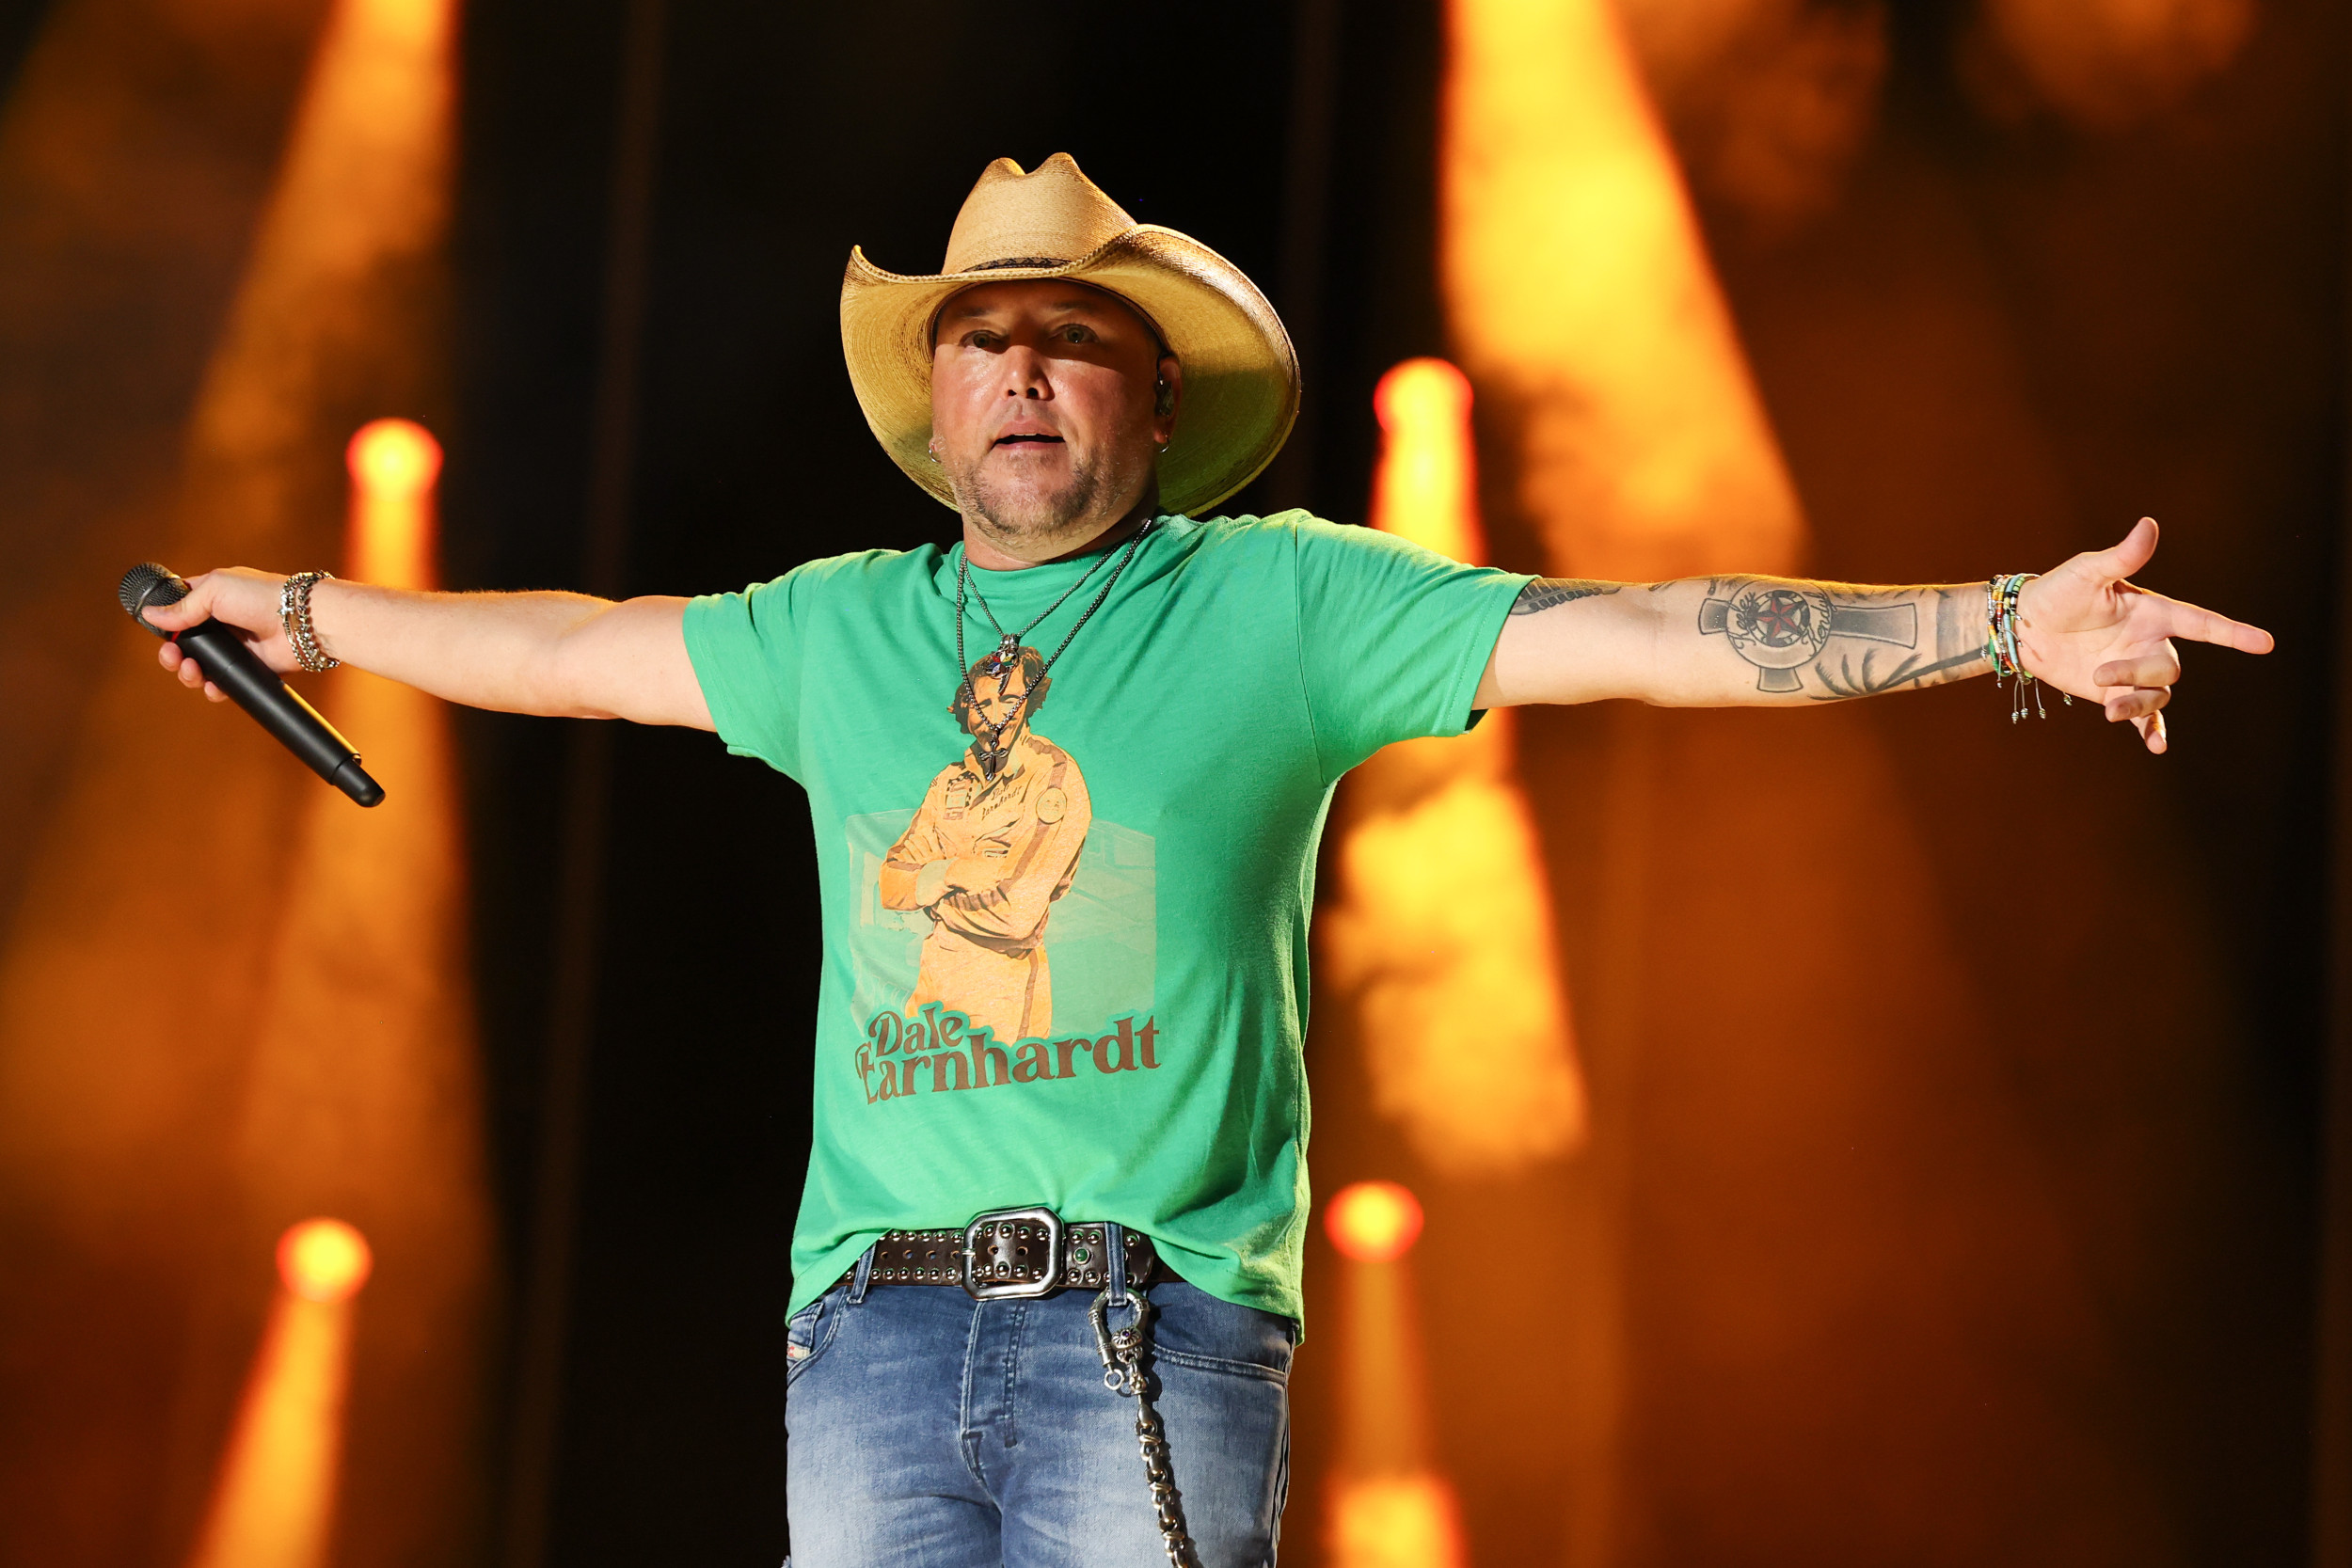 Jason Aldean's New Song Sparks Outrage Over Guns—'Very Scary Lyrics'